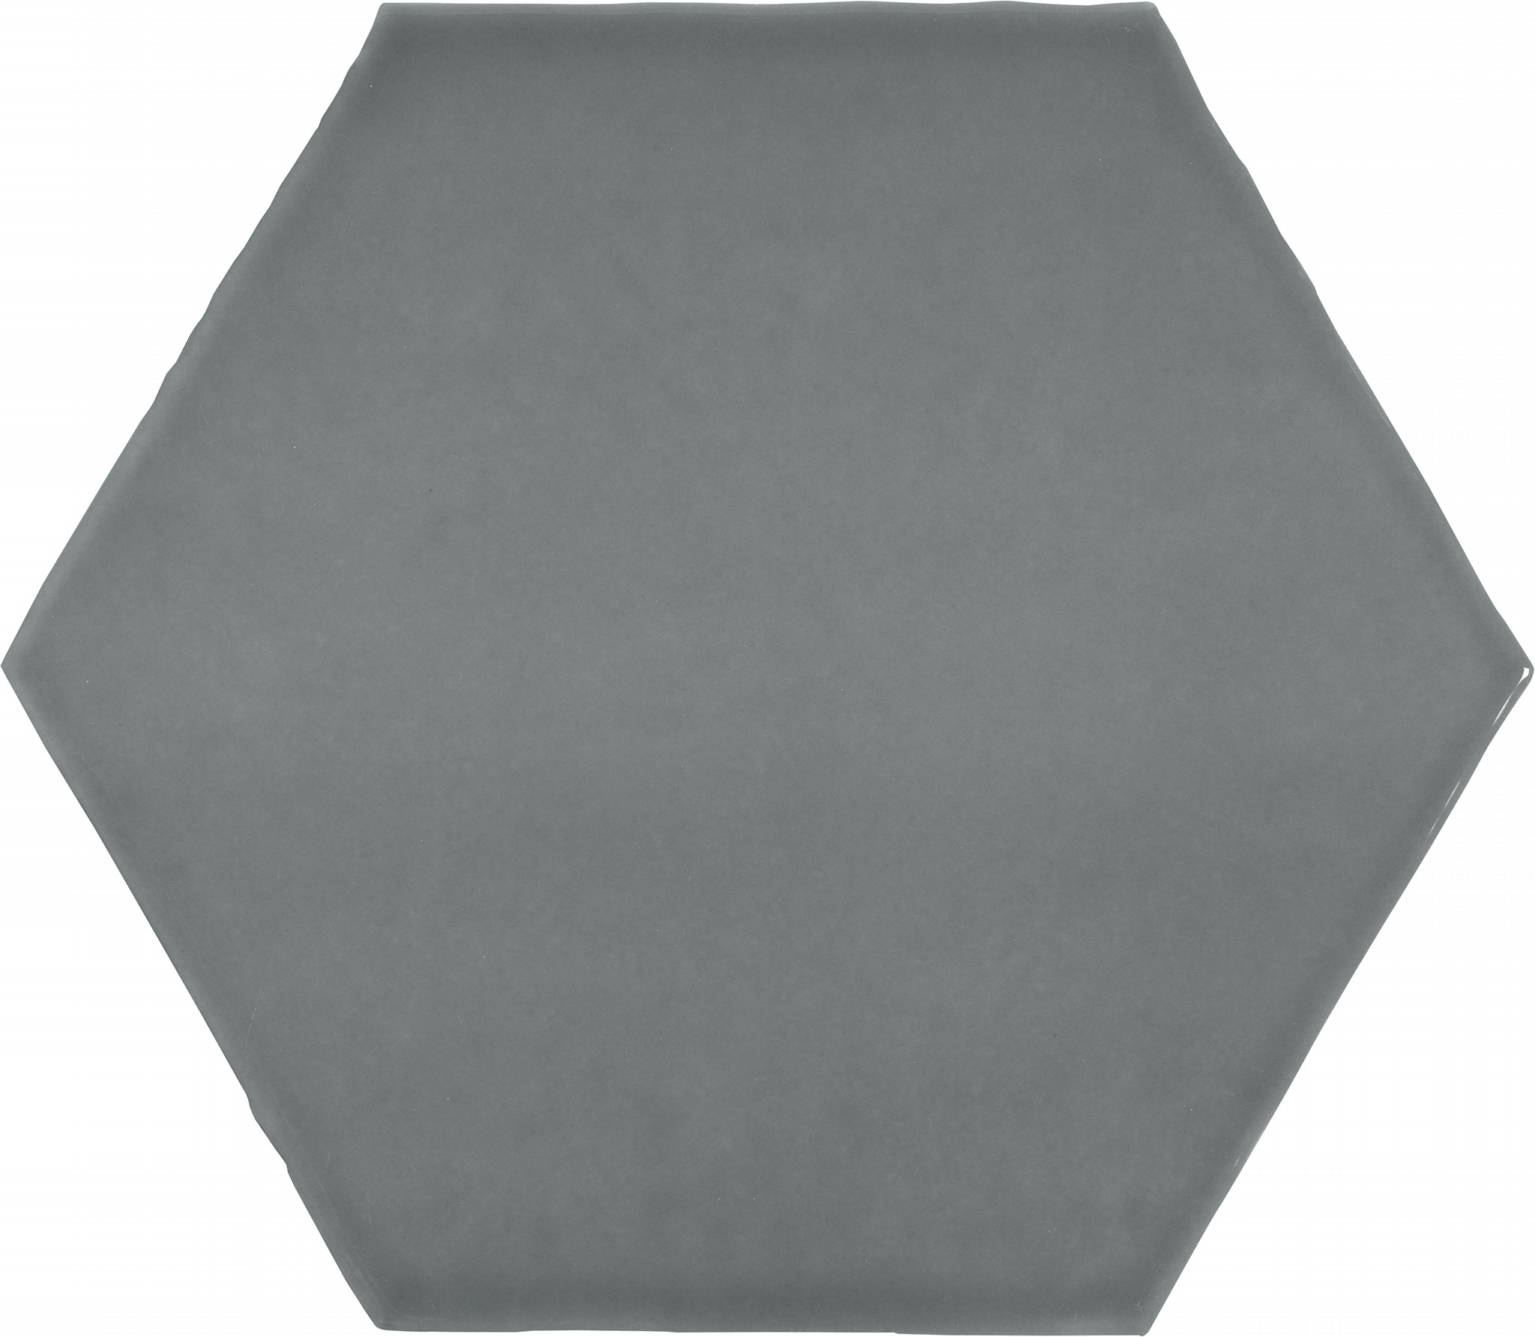 6" Anthracite Charcoal Glossy Hexagon | Arley Wholesale